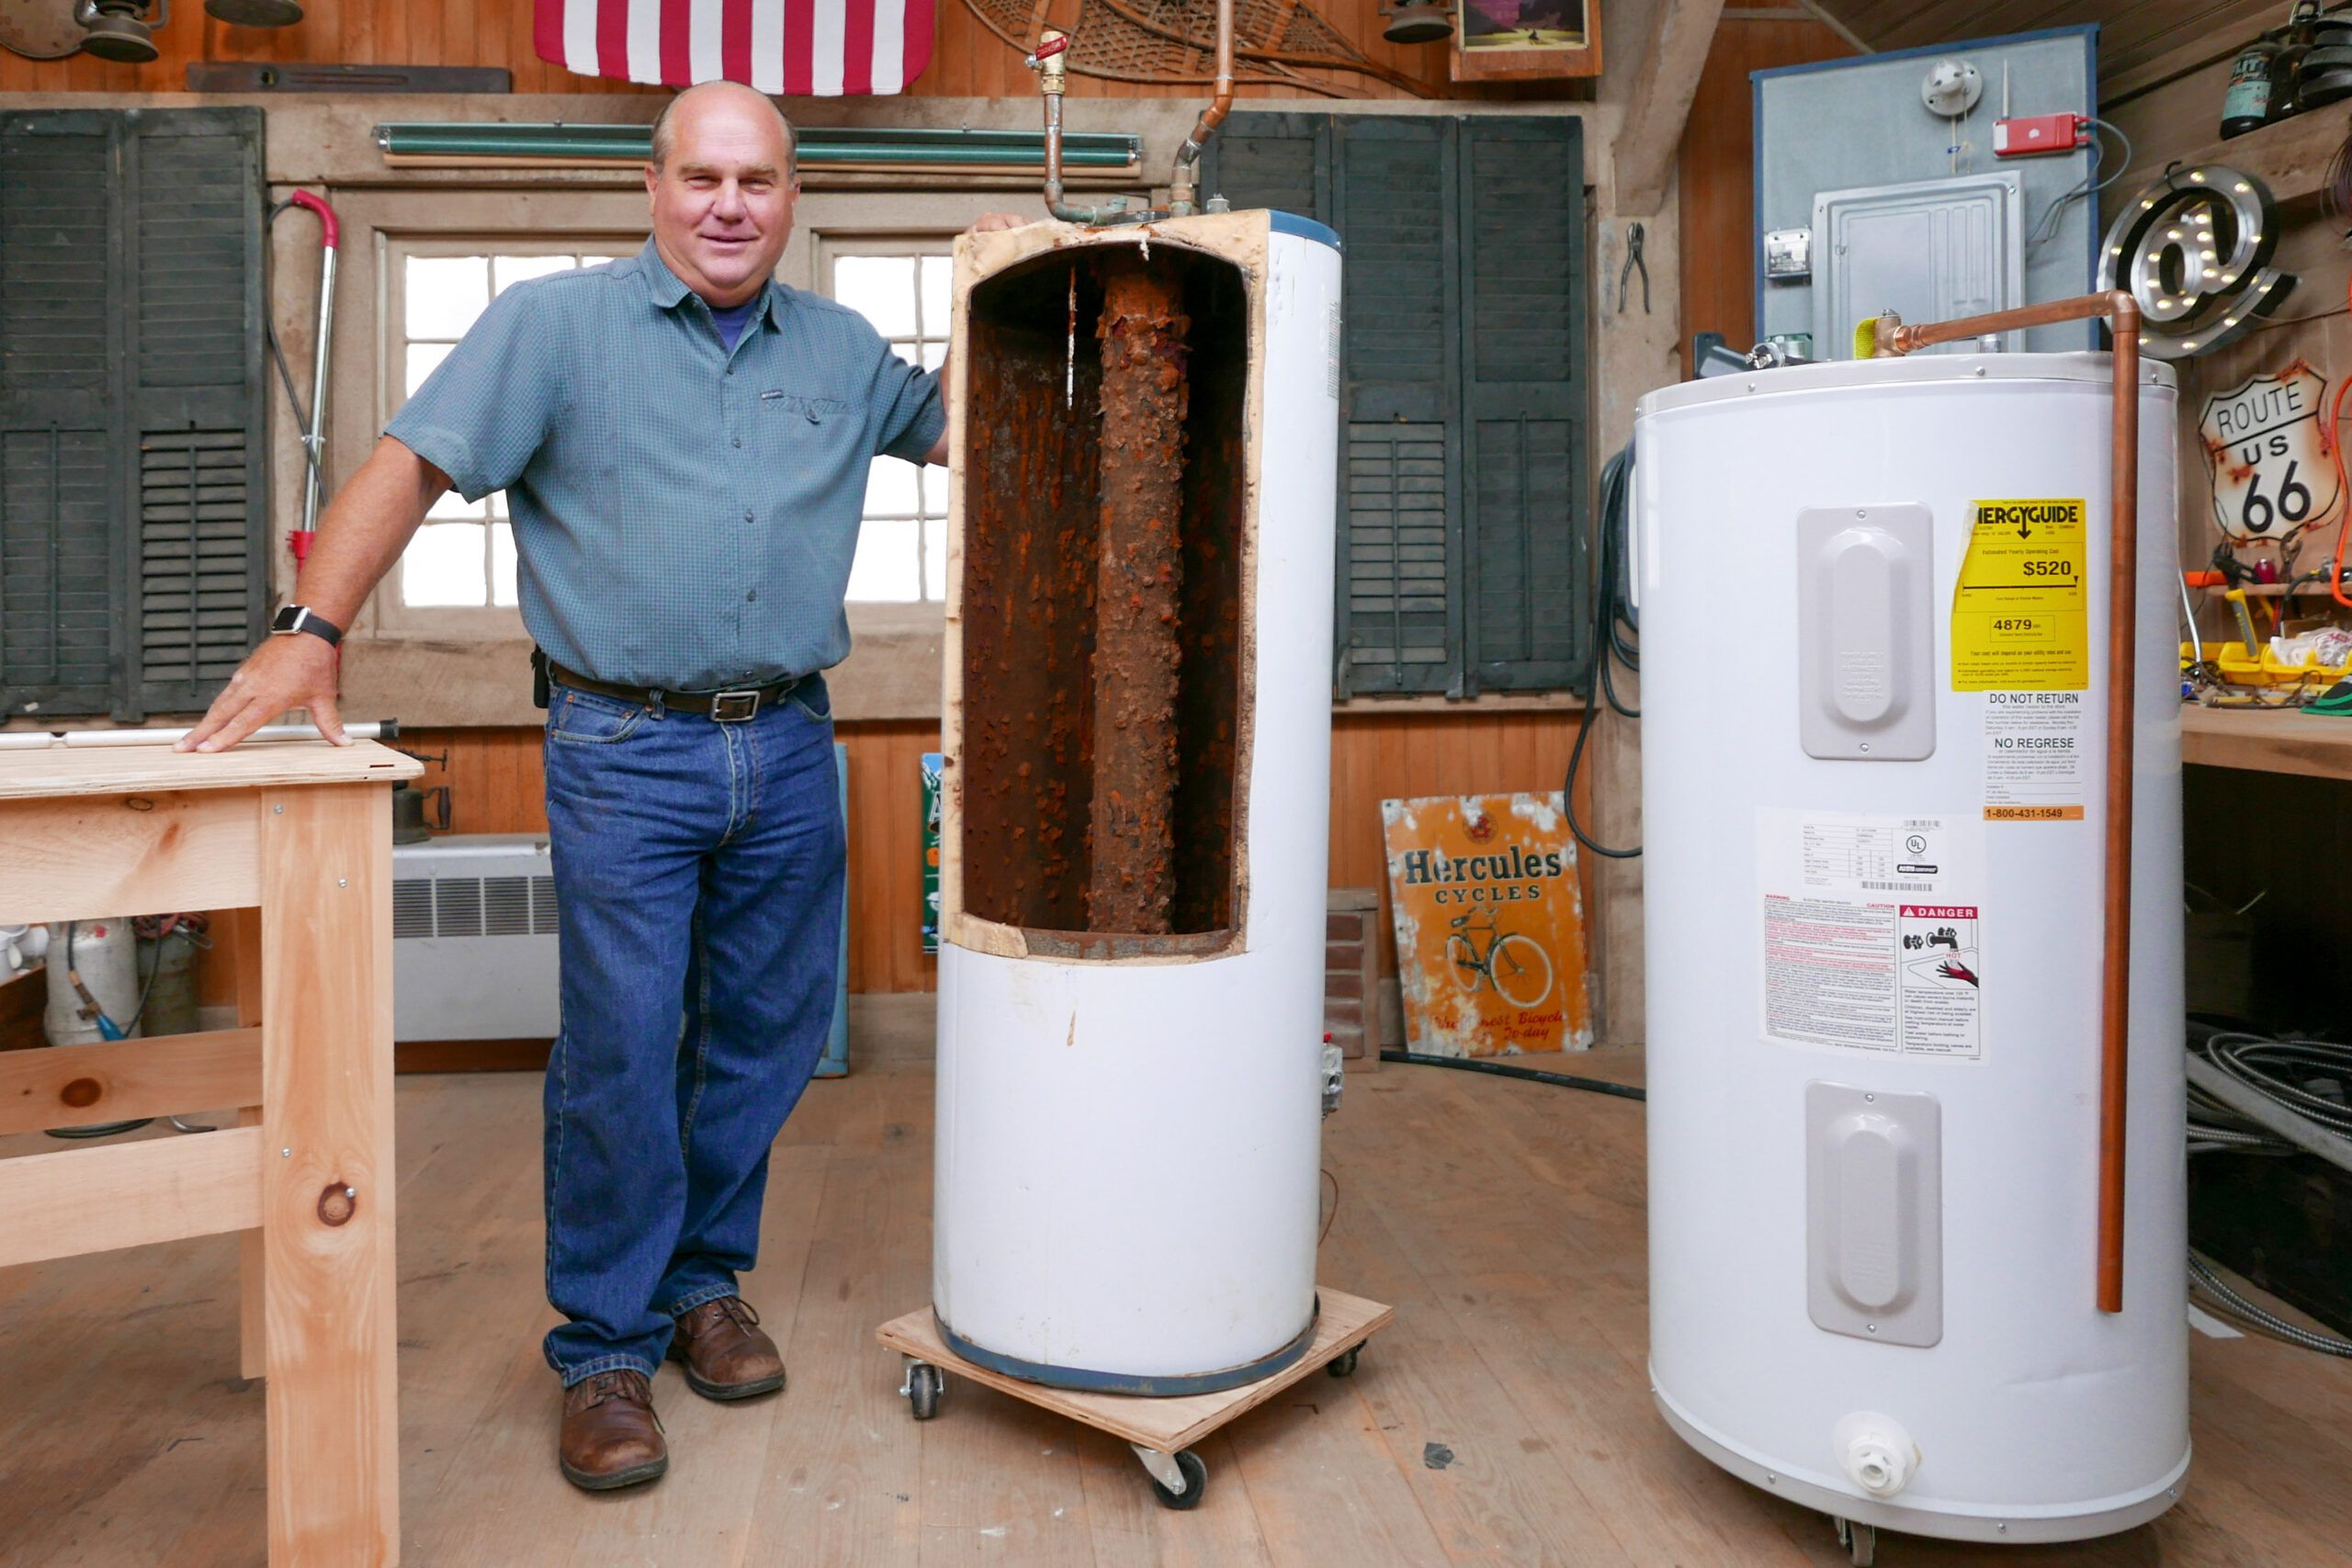 How Much Does a Hot Water Heater Cost? Find the Best Deals Here!